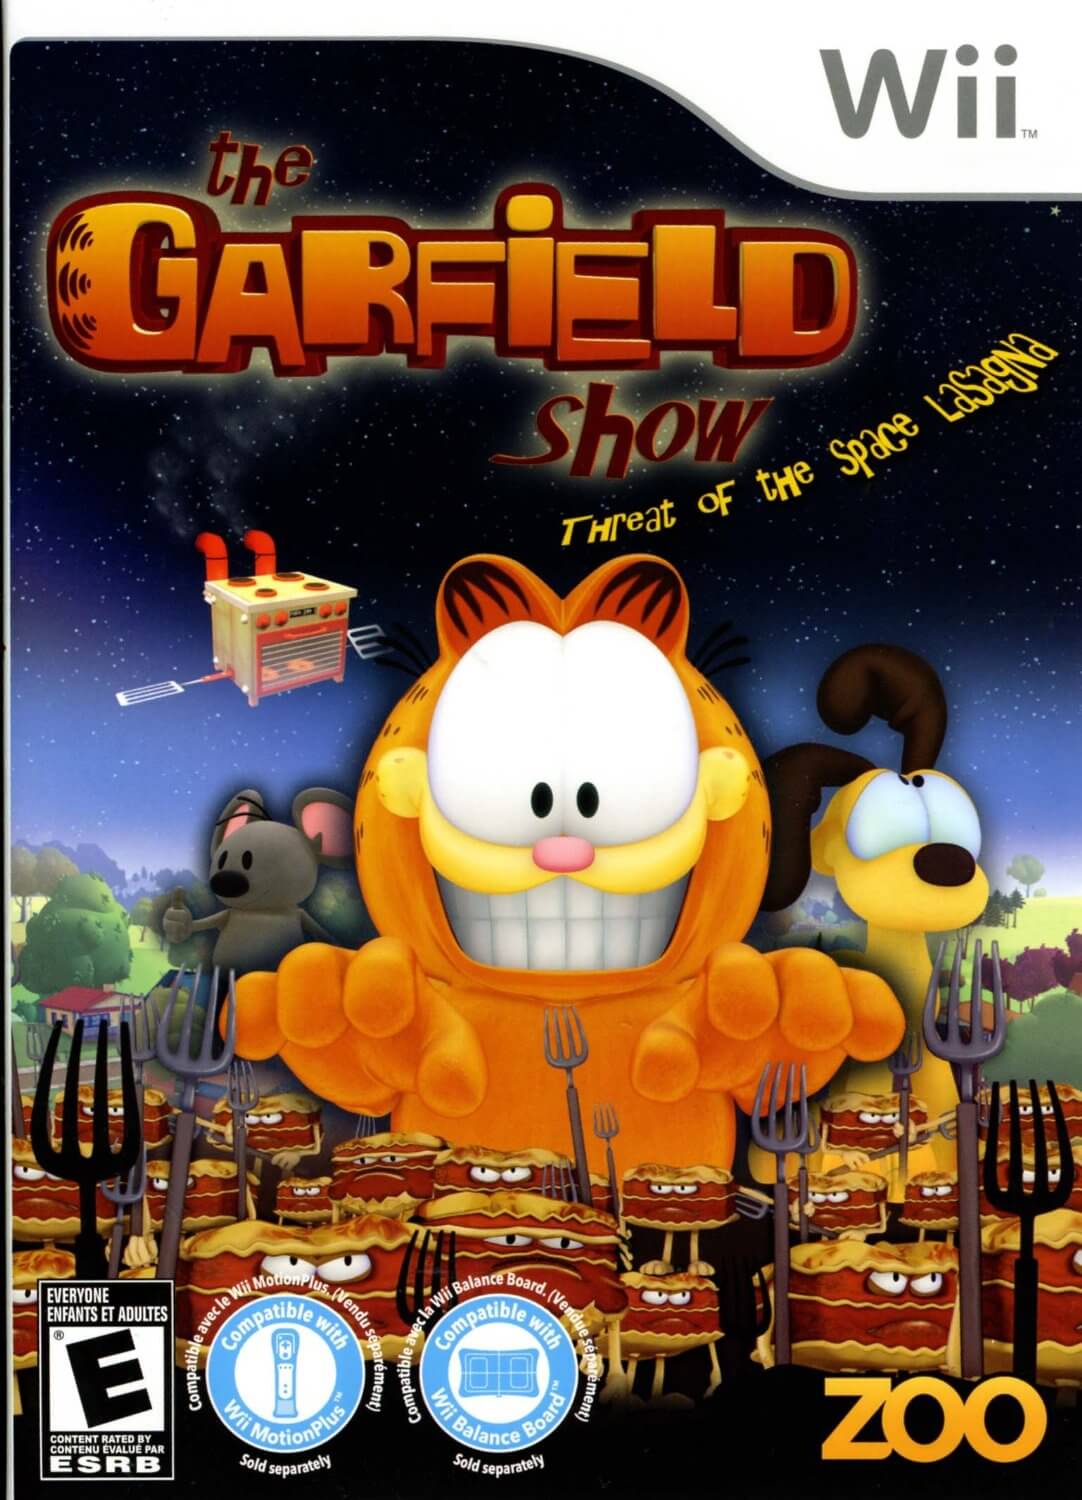 The Garfield Show: The Threat of the Space Lasagna